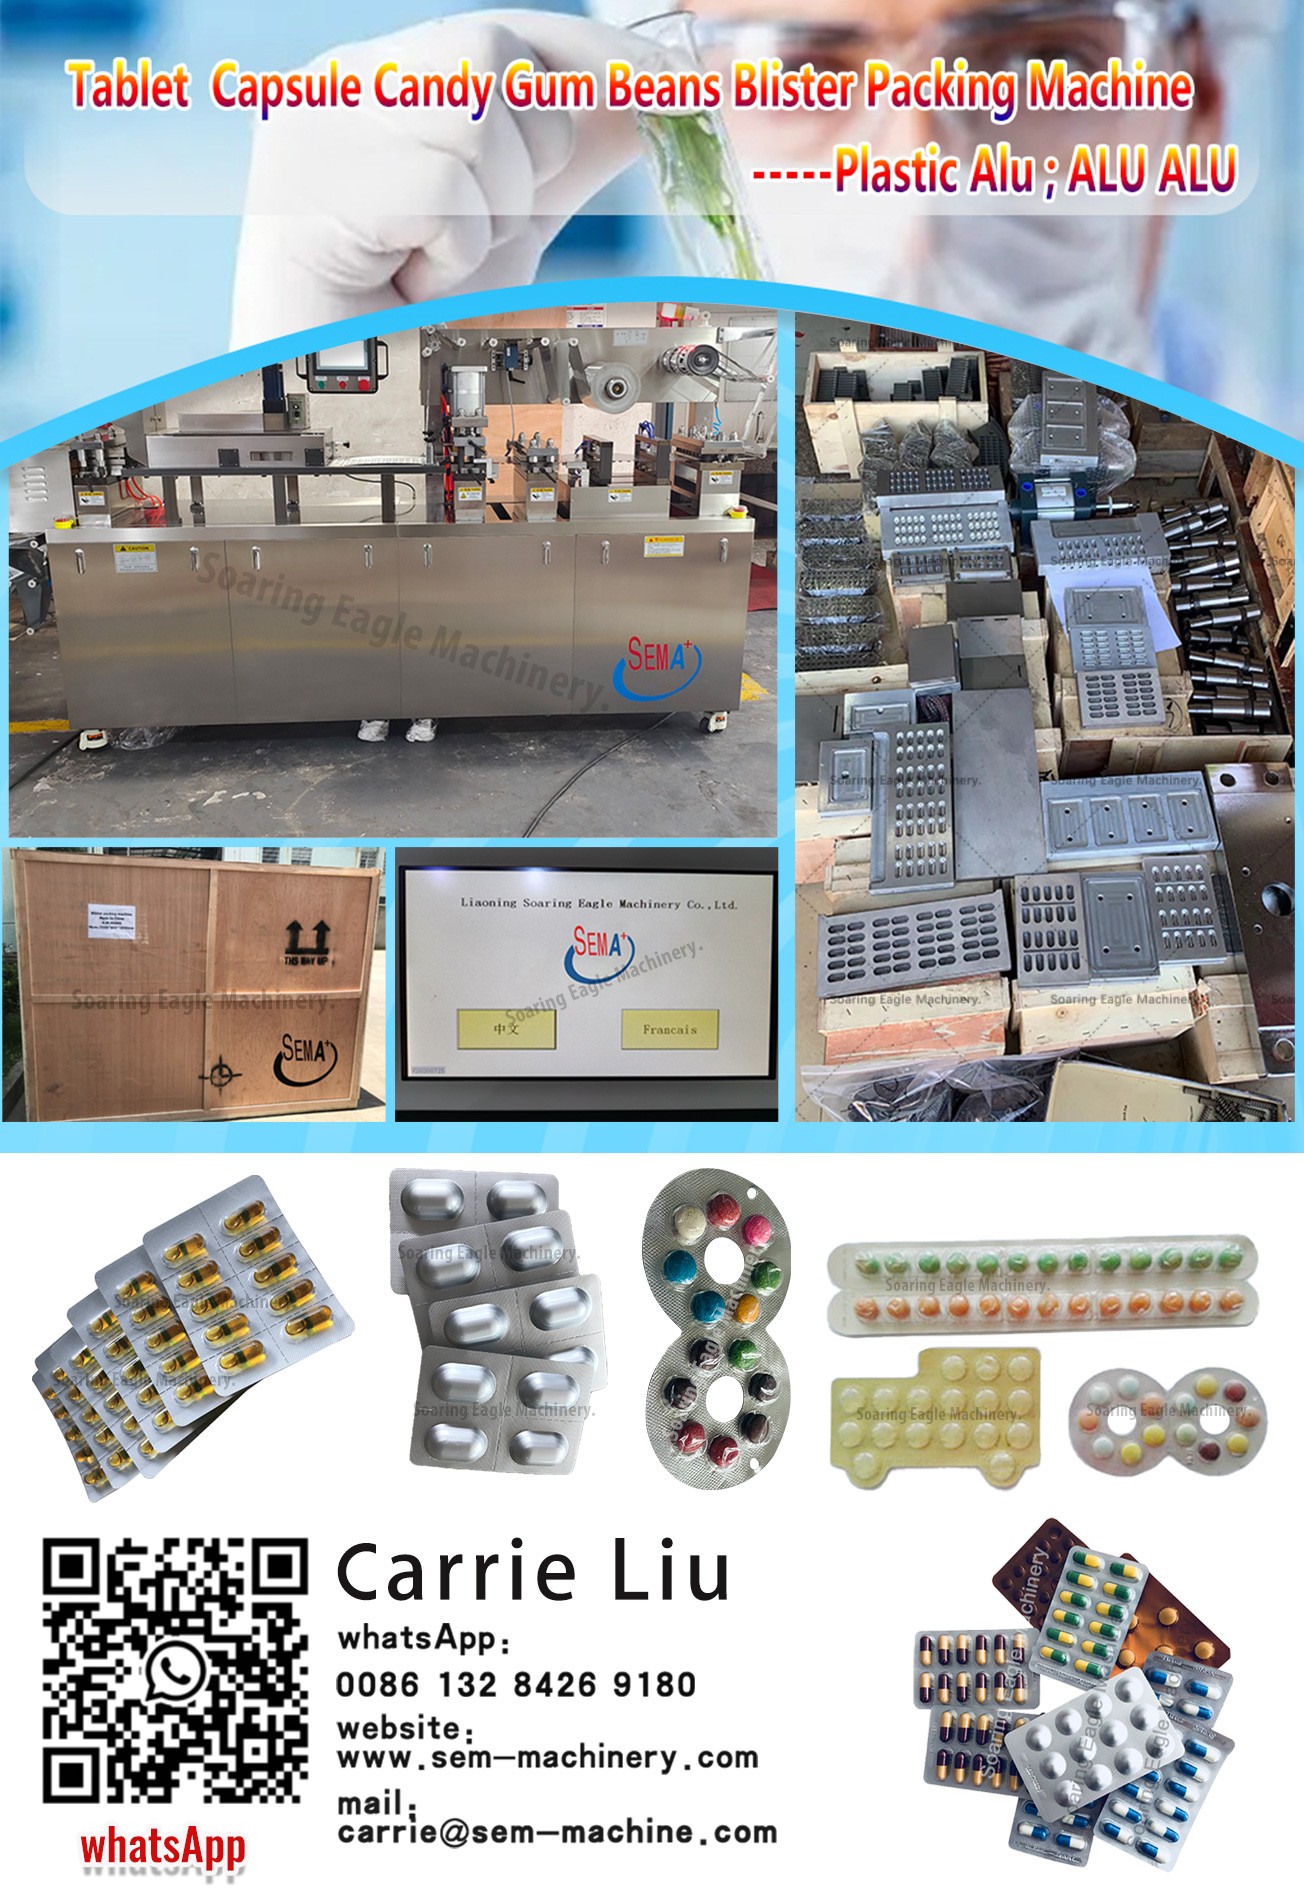 Tablet capsule candy gum beans blister packing machine ——delivered to Thailand